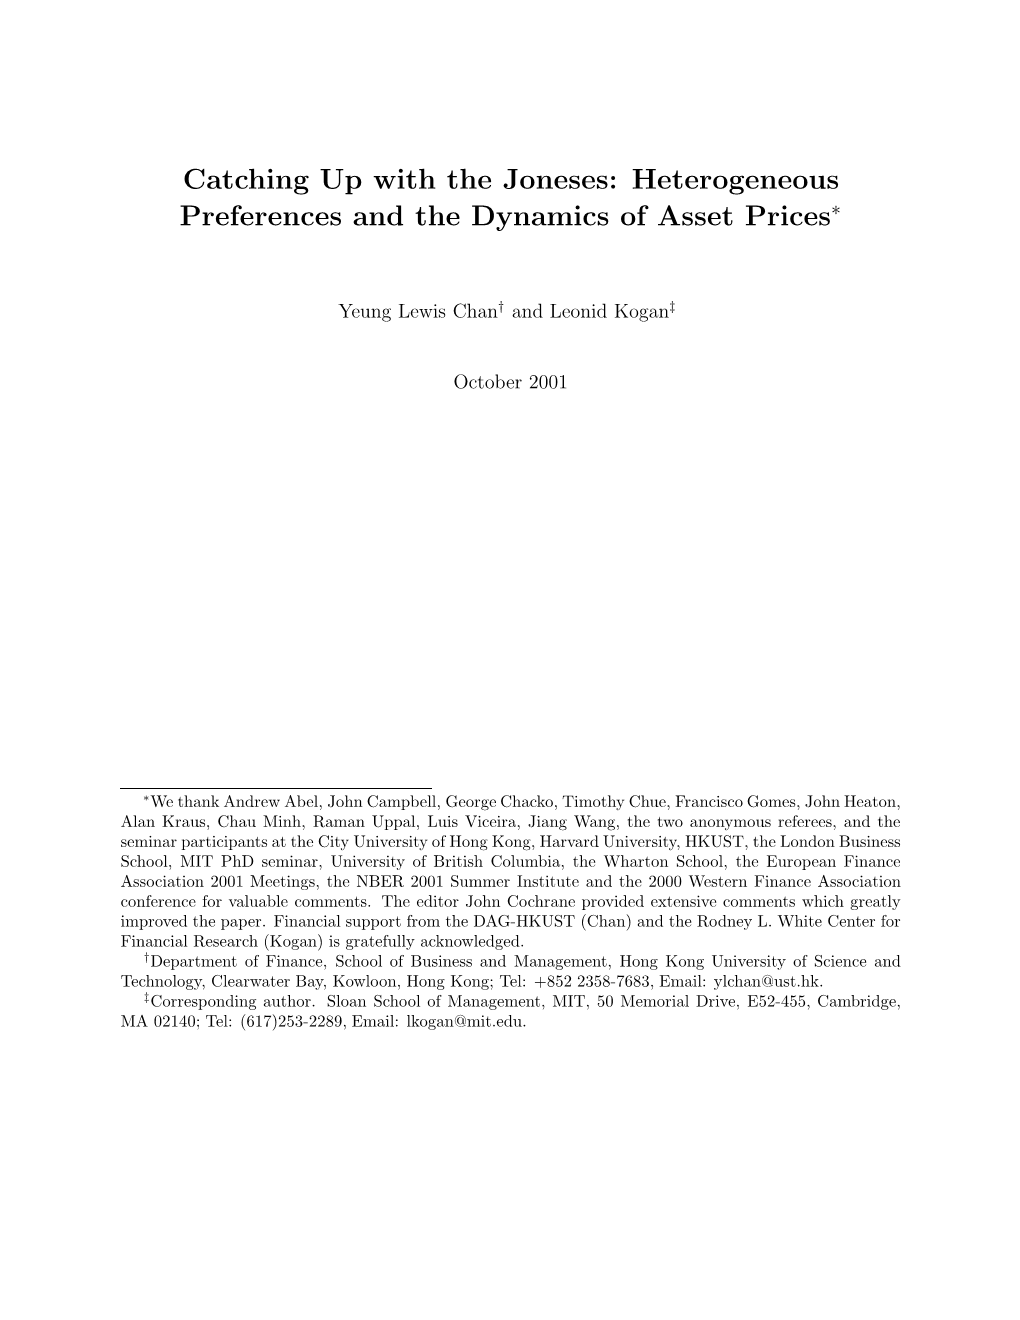 Catching up with the Joneses: Heterogeneous Preferences and the Dynamics of Asset Prices∗